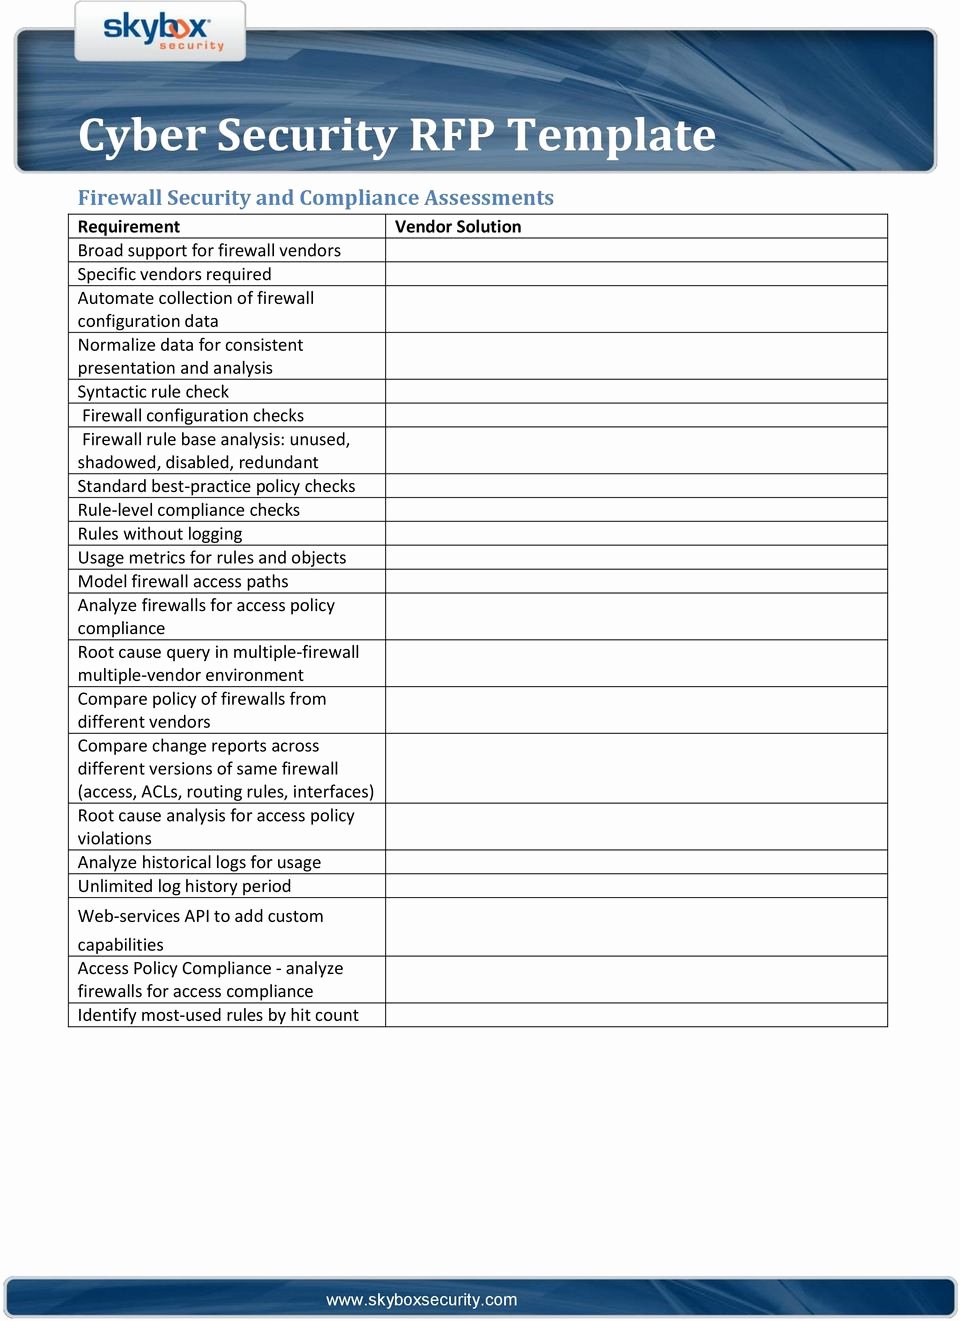 Cyber Security Policy Template Beautiful Cyber Security Rfp Template Pdf